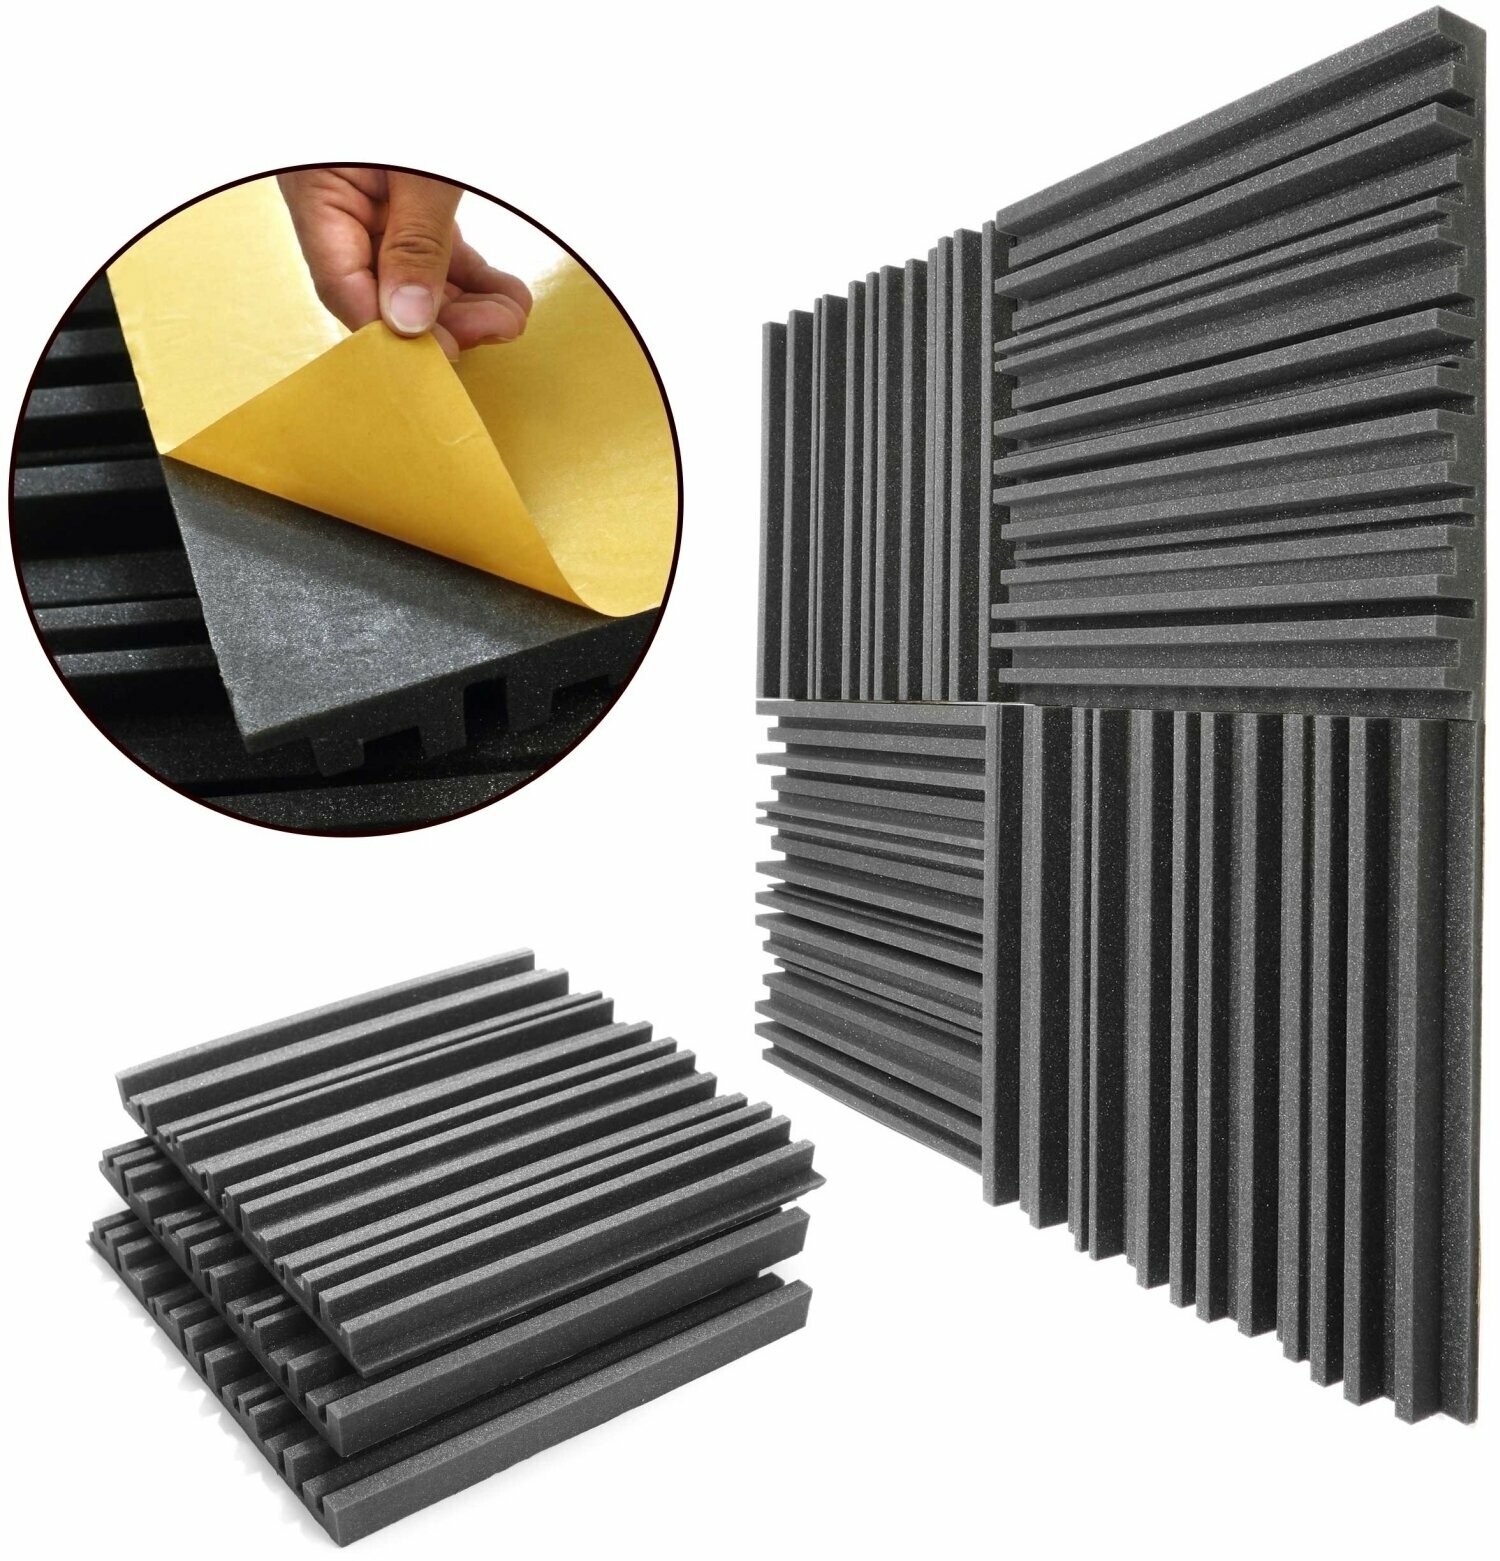 Chłonny panel piankowy Veles-X Acoustic Self-Adhesive Wedges 30 x 30 x 5 cm - MVSS 302 Anthracite